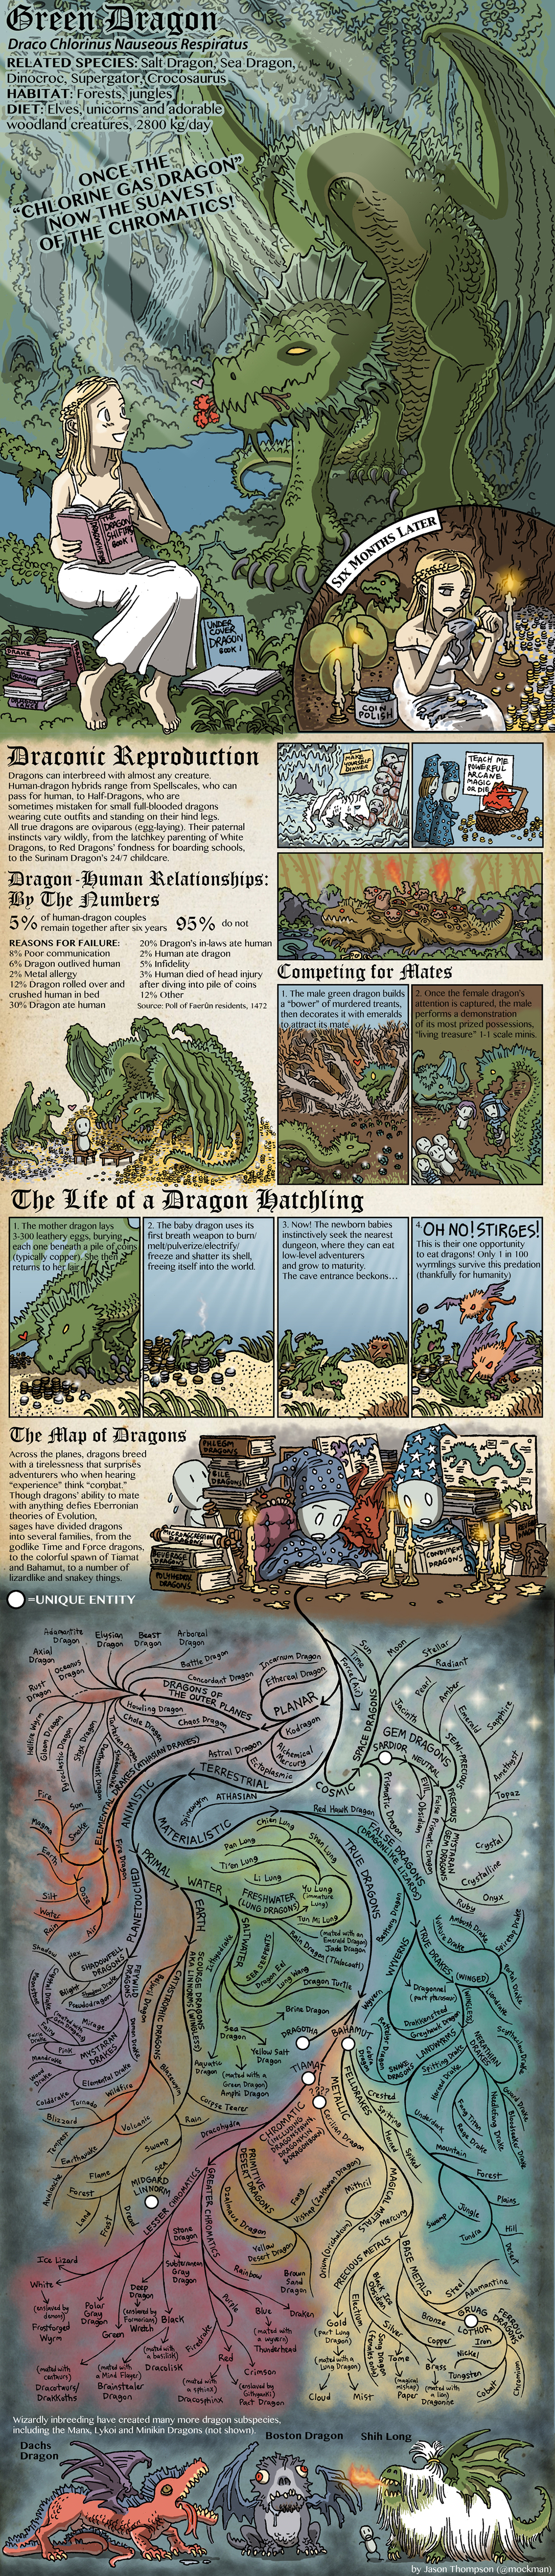 Toon_Whitedragon D&D April Fools cartoon Dungeons and